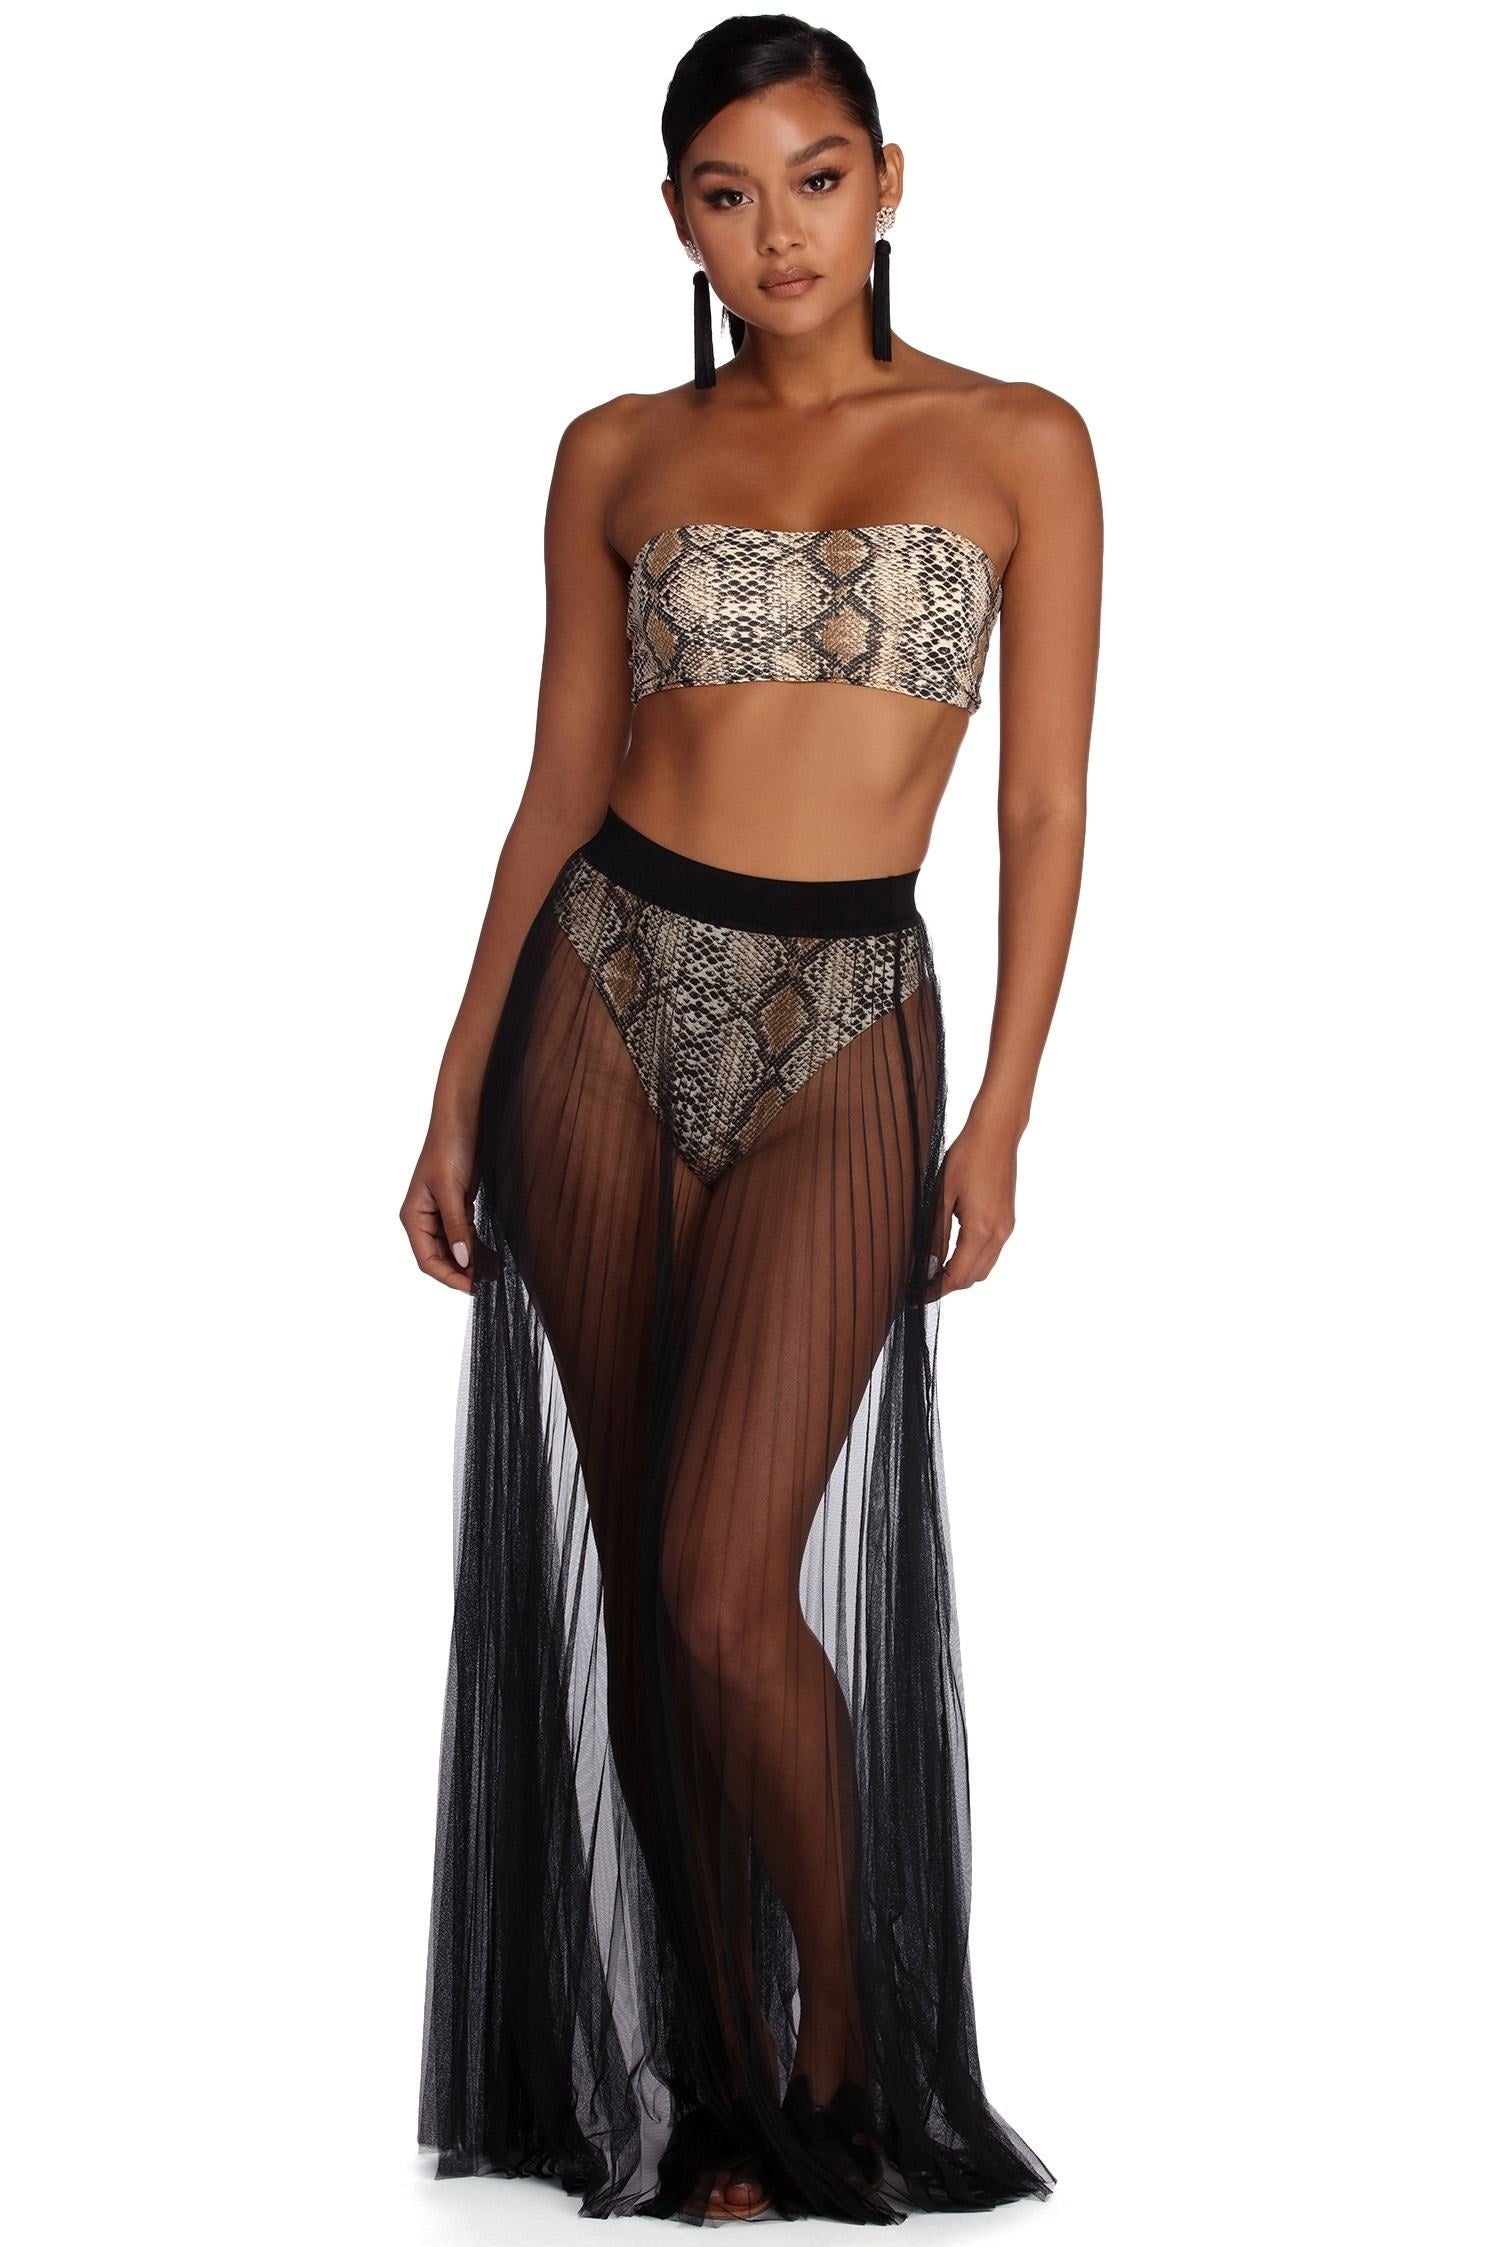 Mesmerizing In Mesh Maxi Skirt - Lady Occasions